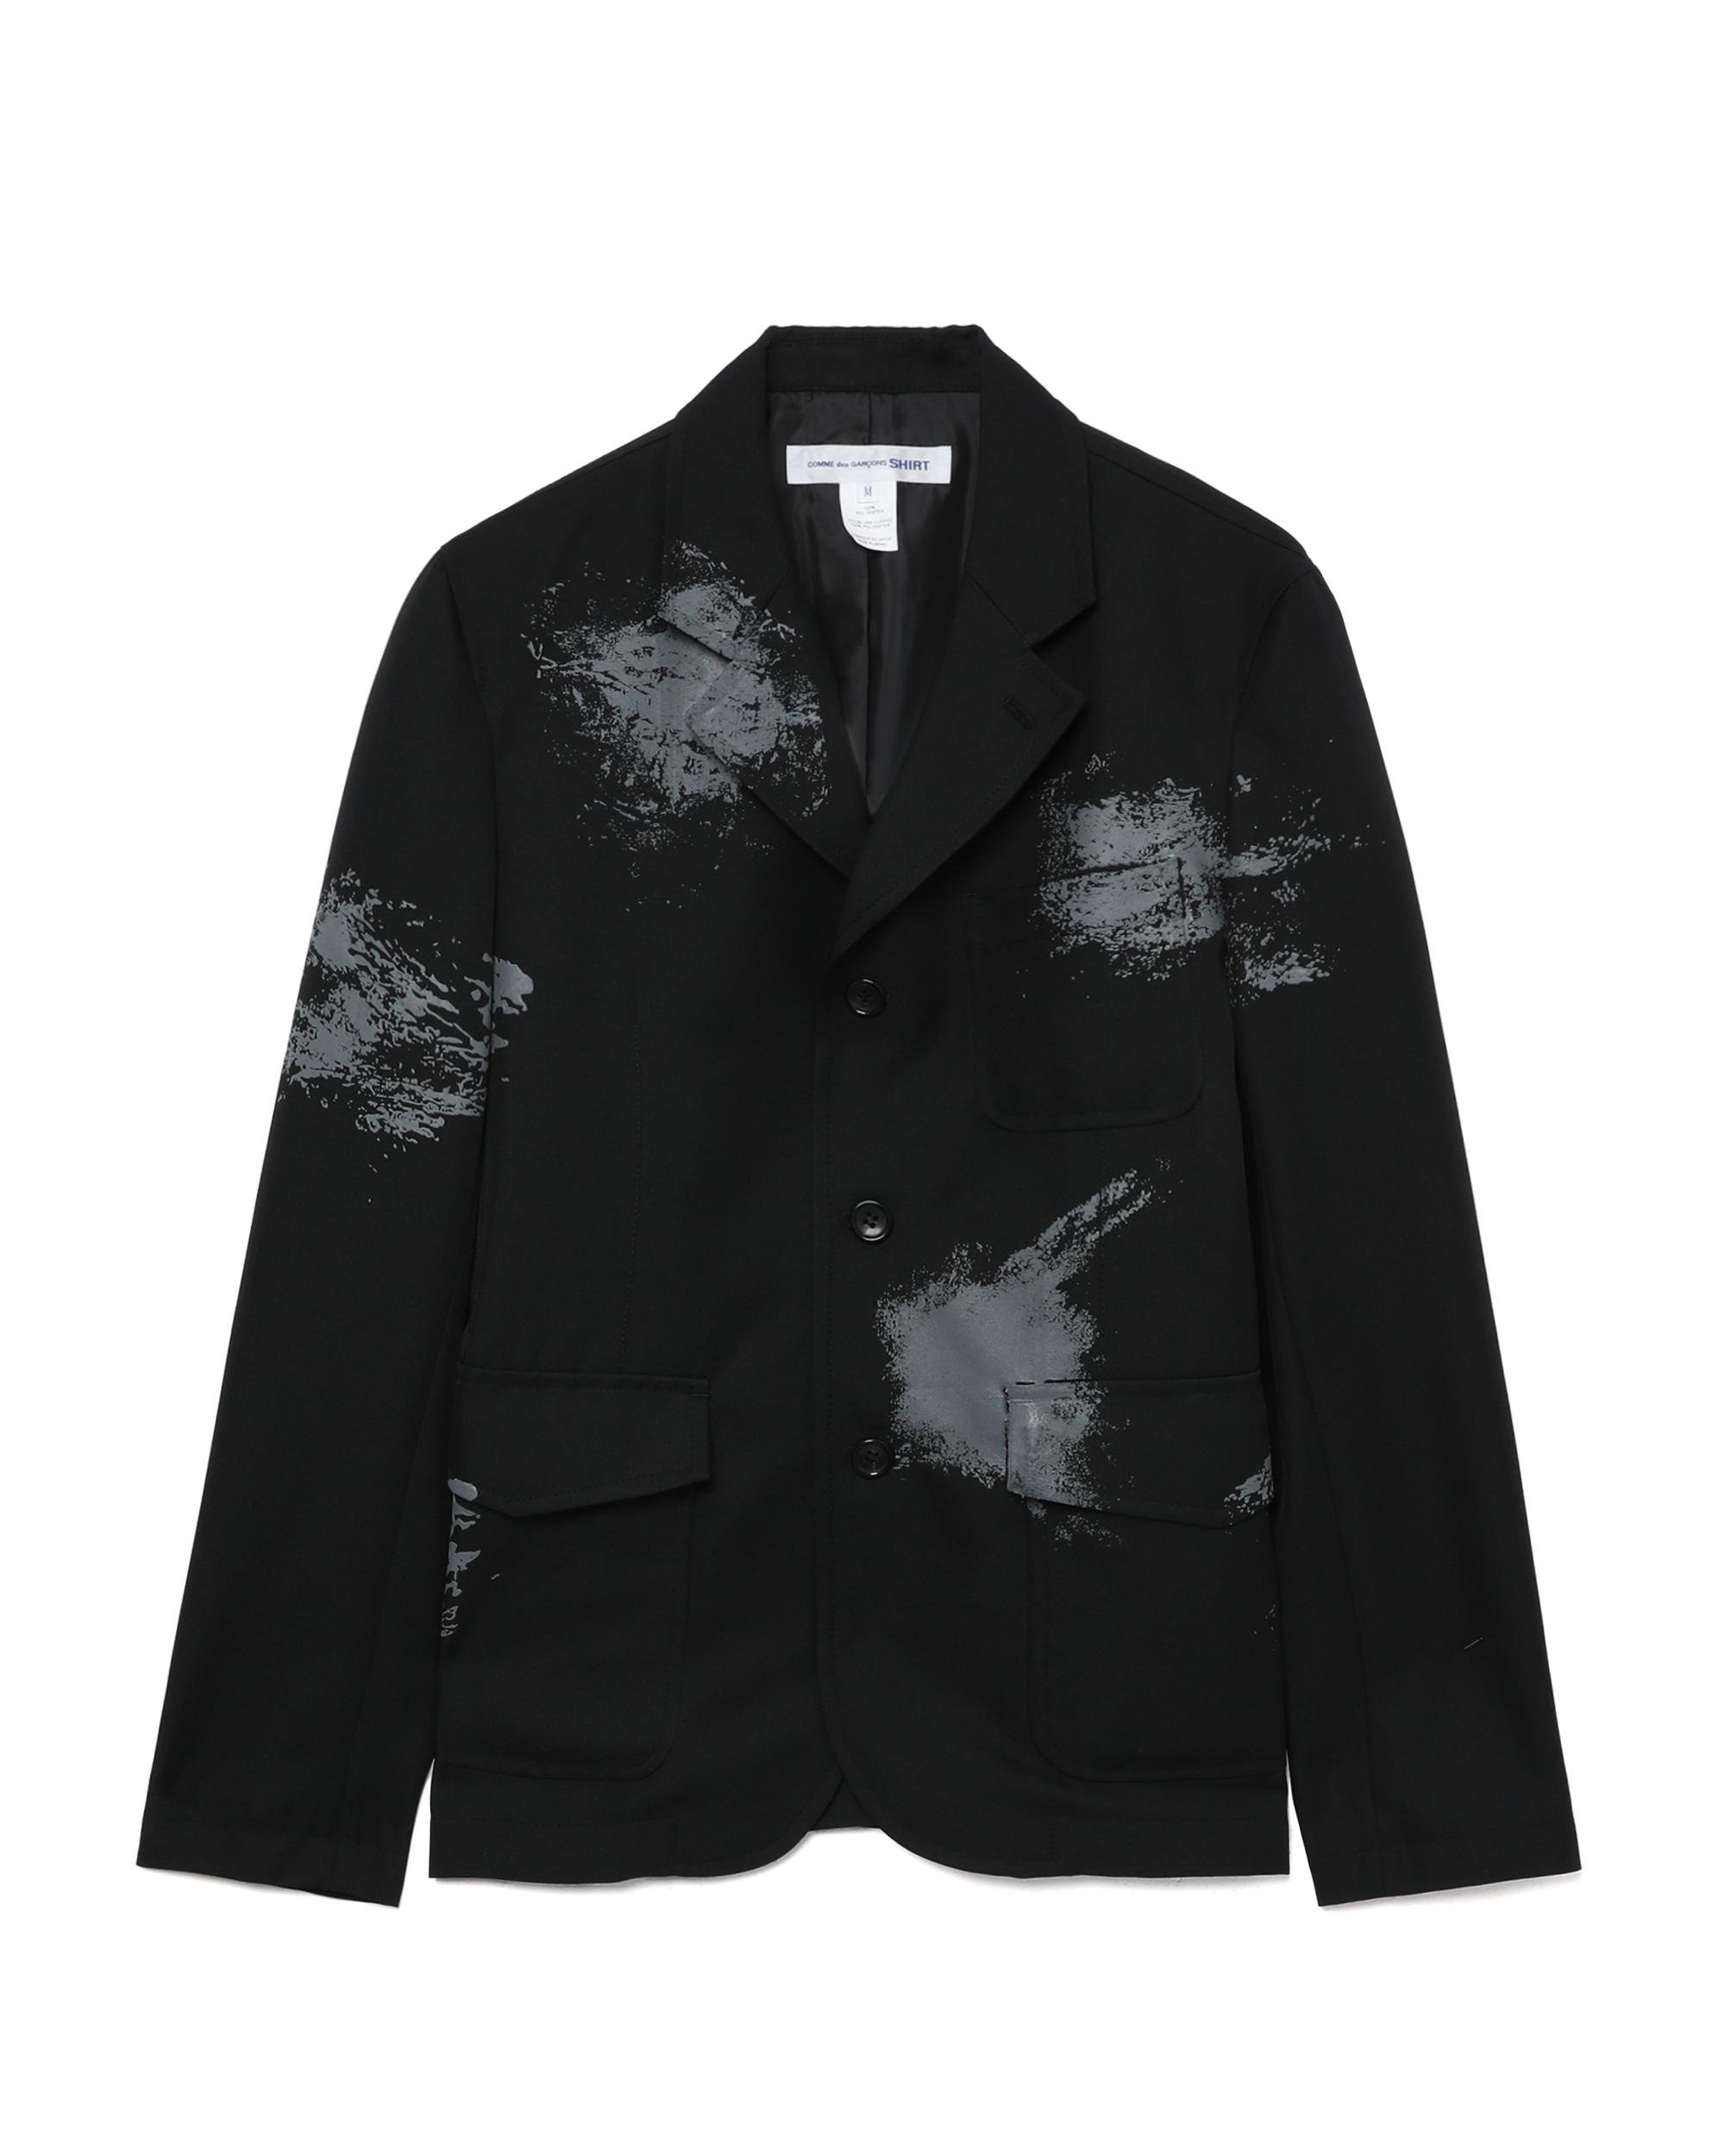 Graphic print single breasted blazer by COMME DES GARCONS